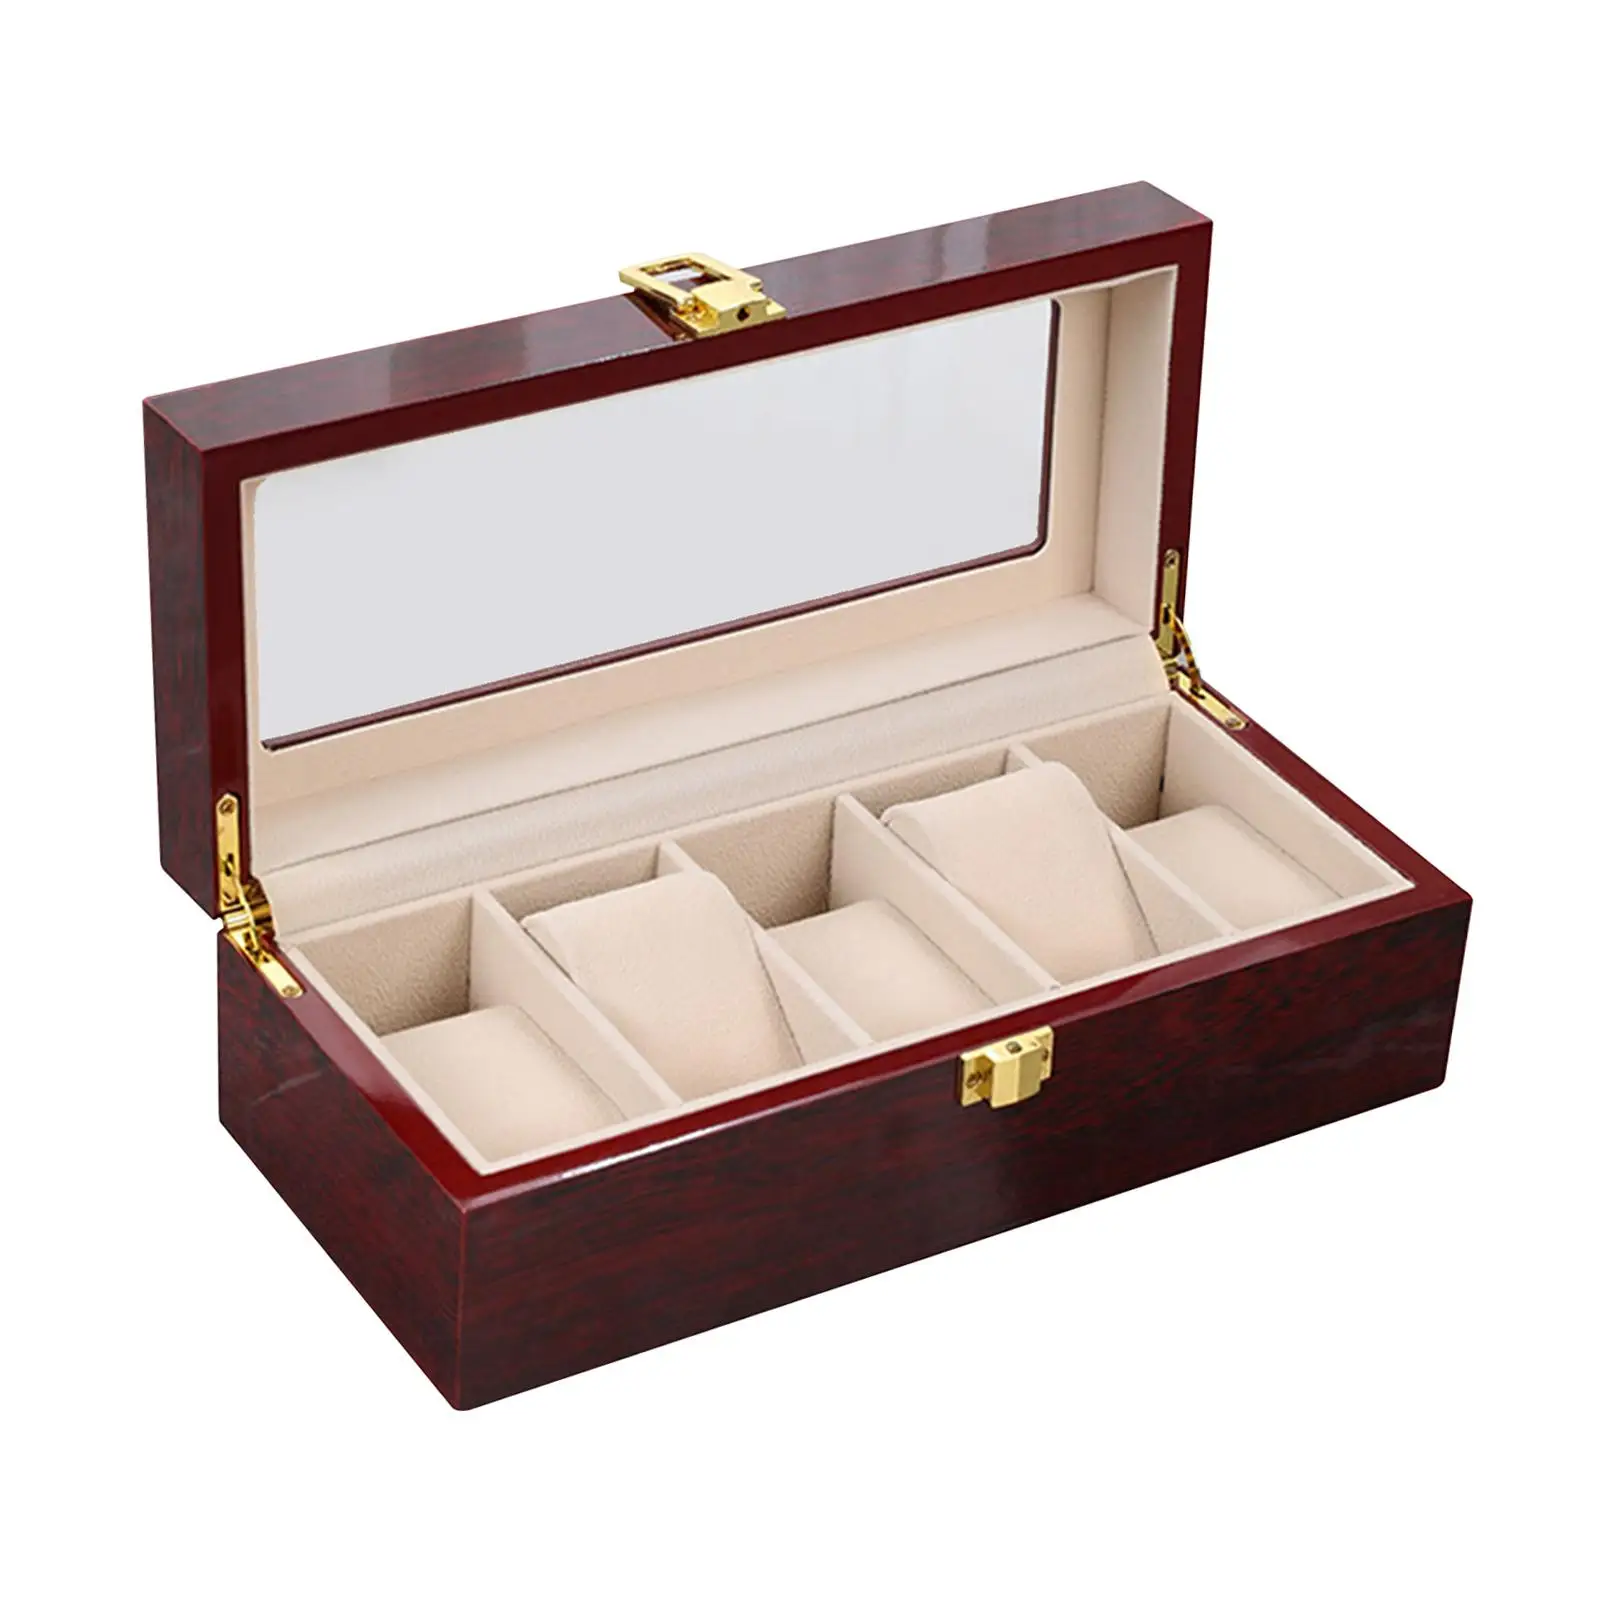 Watch Box Organizer Container Wooden Watch Box for Table Dresser Shop Display Men Women Watches Necklace Bracelet Earrings